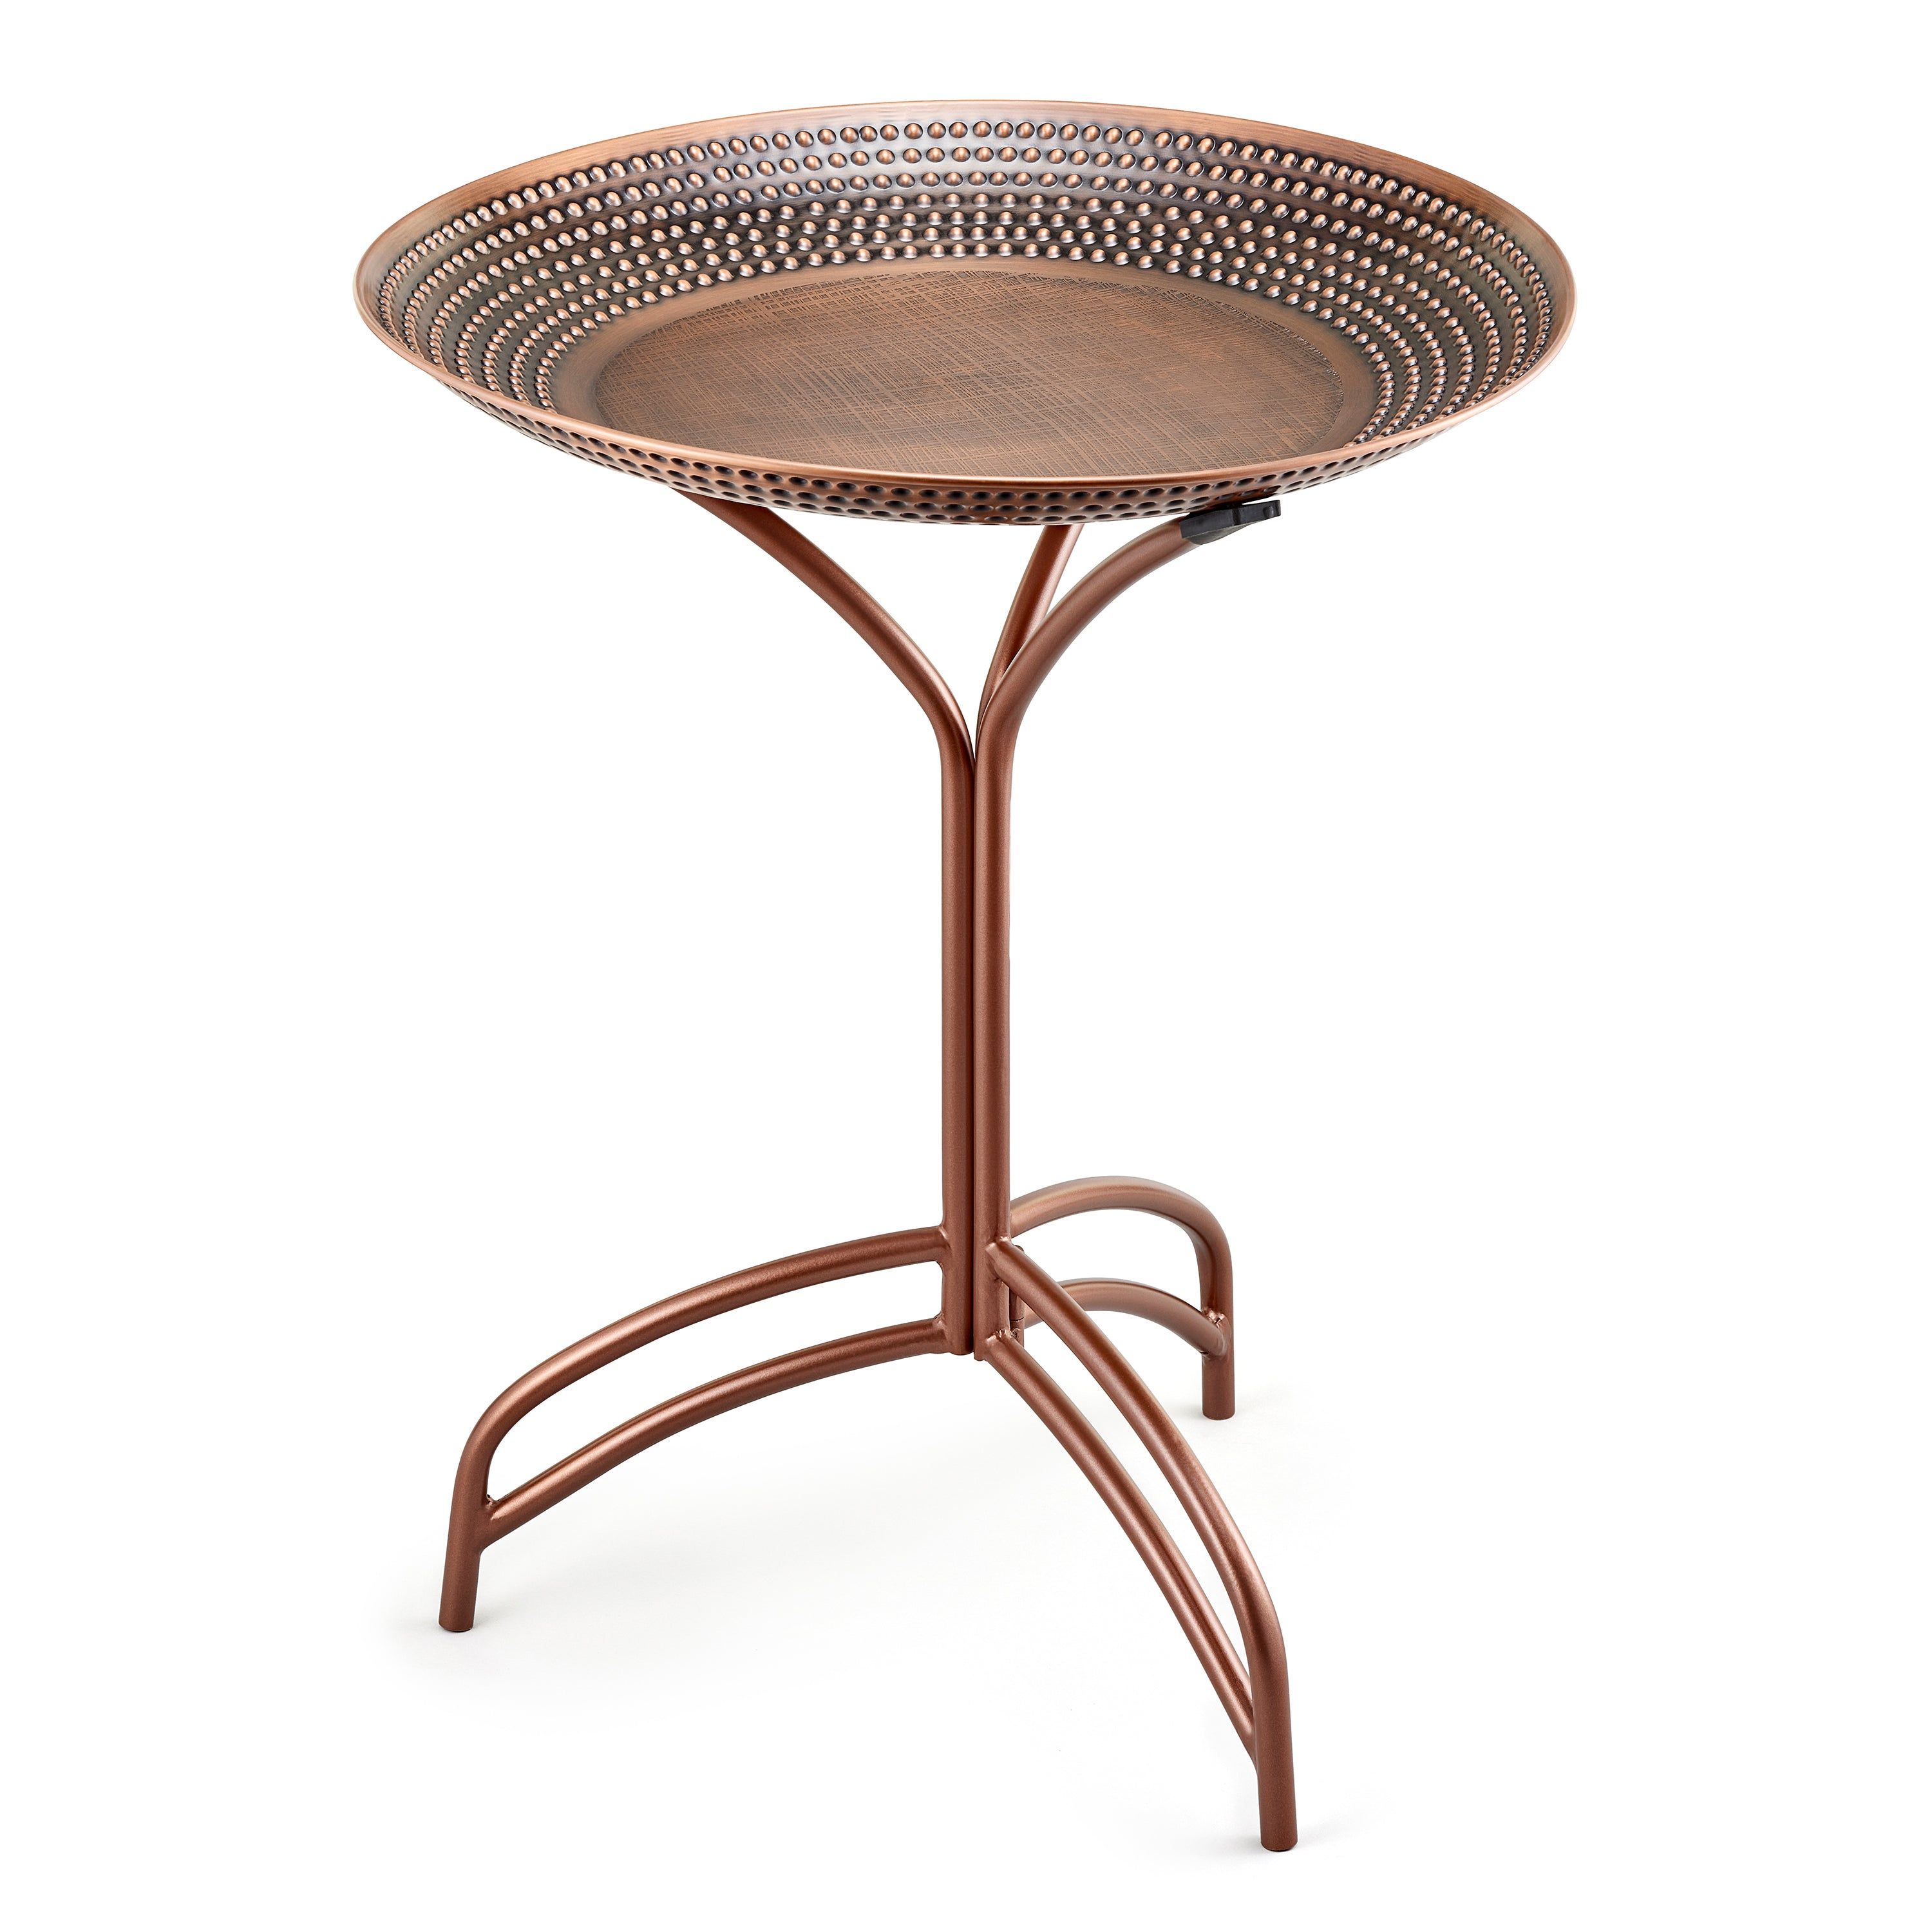 20" Copper Tranquility Birdbath with Collapsible Stand